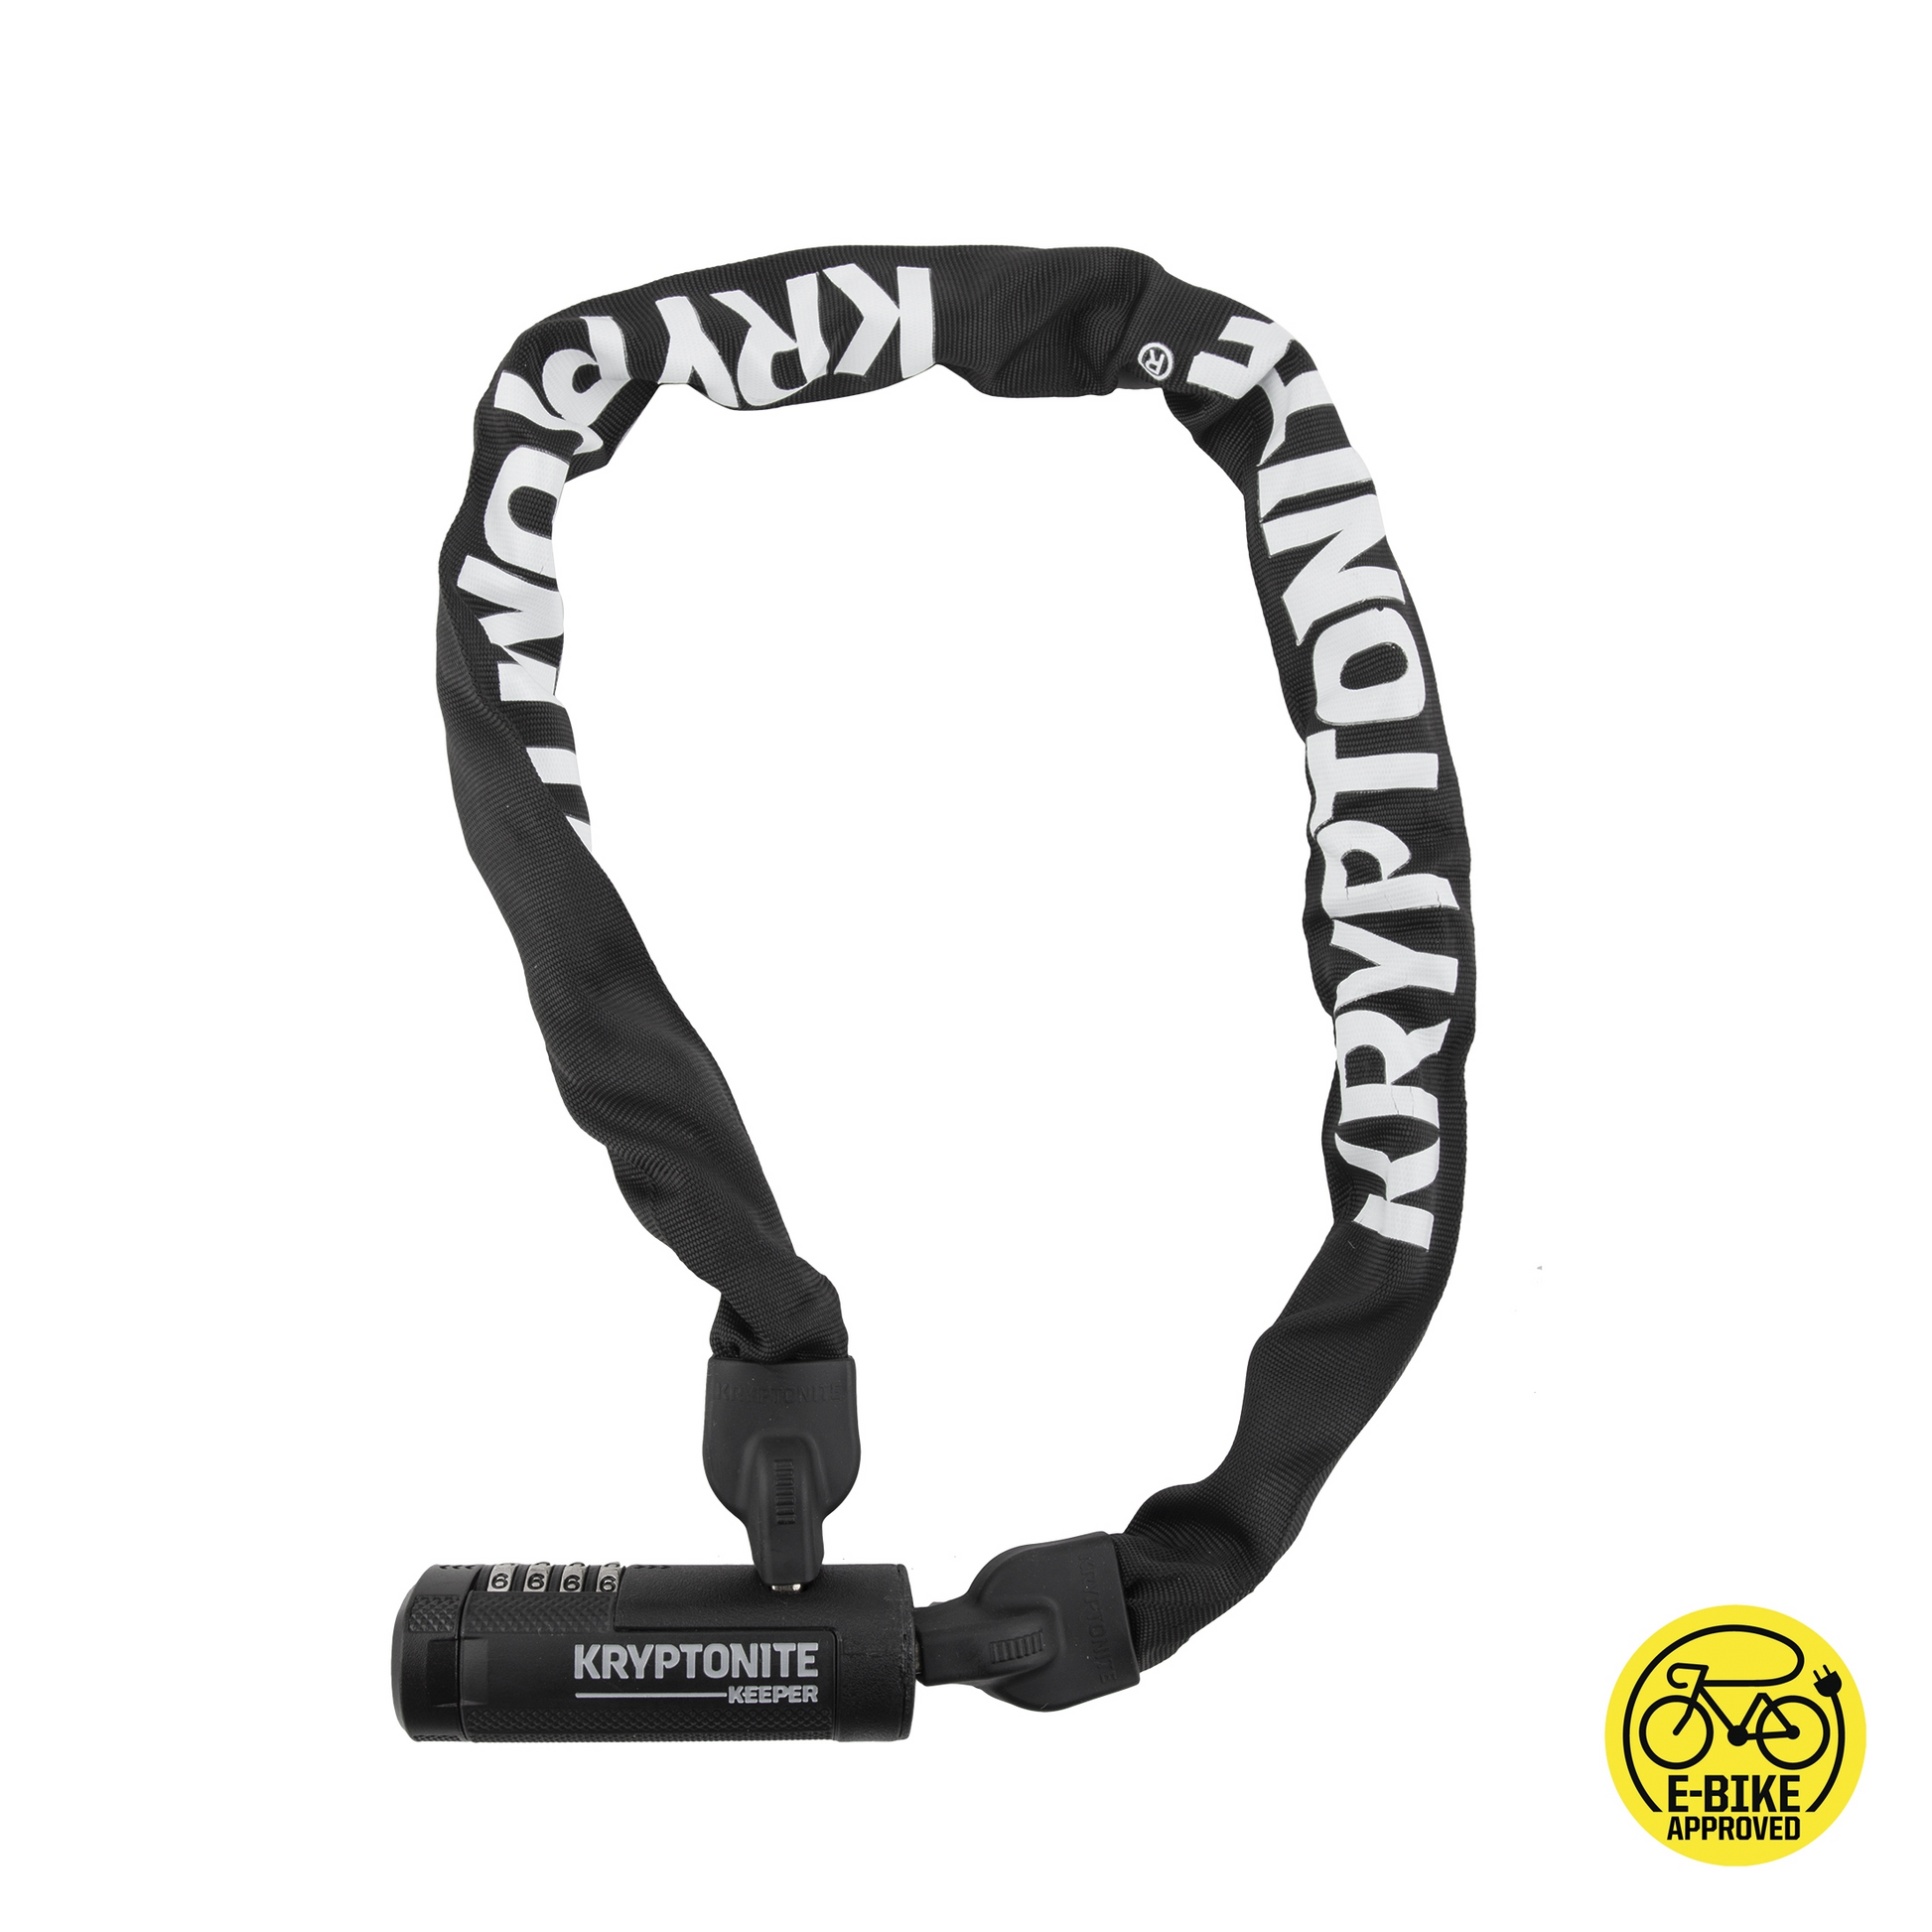 A Kryptonite Keeper 790 1 with a black cover and bold white logo. The coiled lock features a resettable combination, ensuring customizable security. Its manganese steel chain ensures robustness, and there's an "E-bike approved" logo at the bottom right corner.